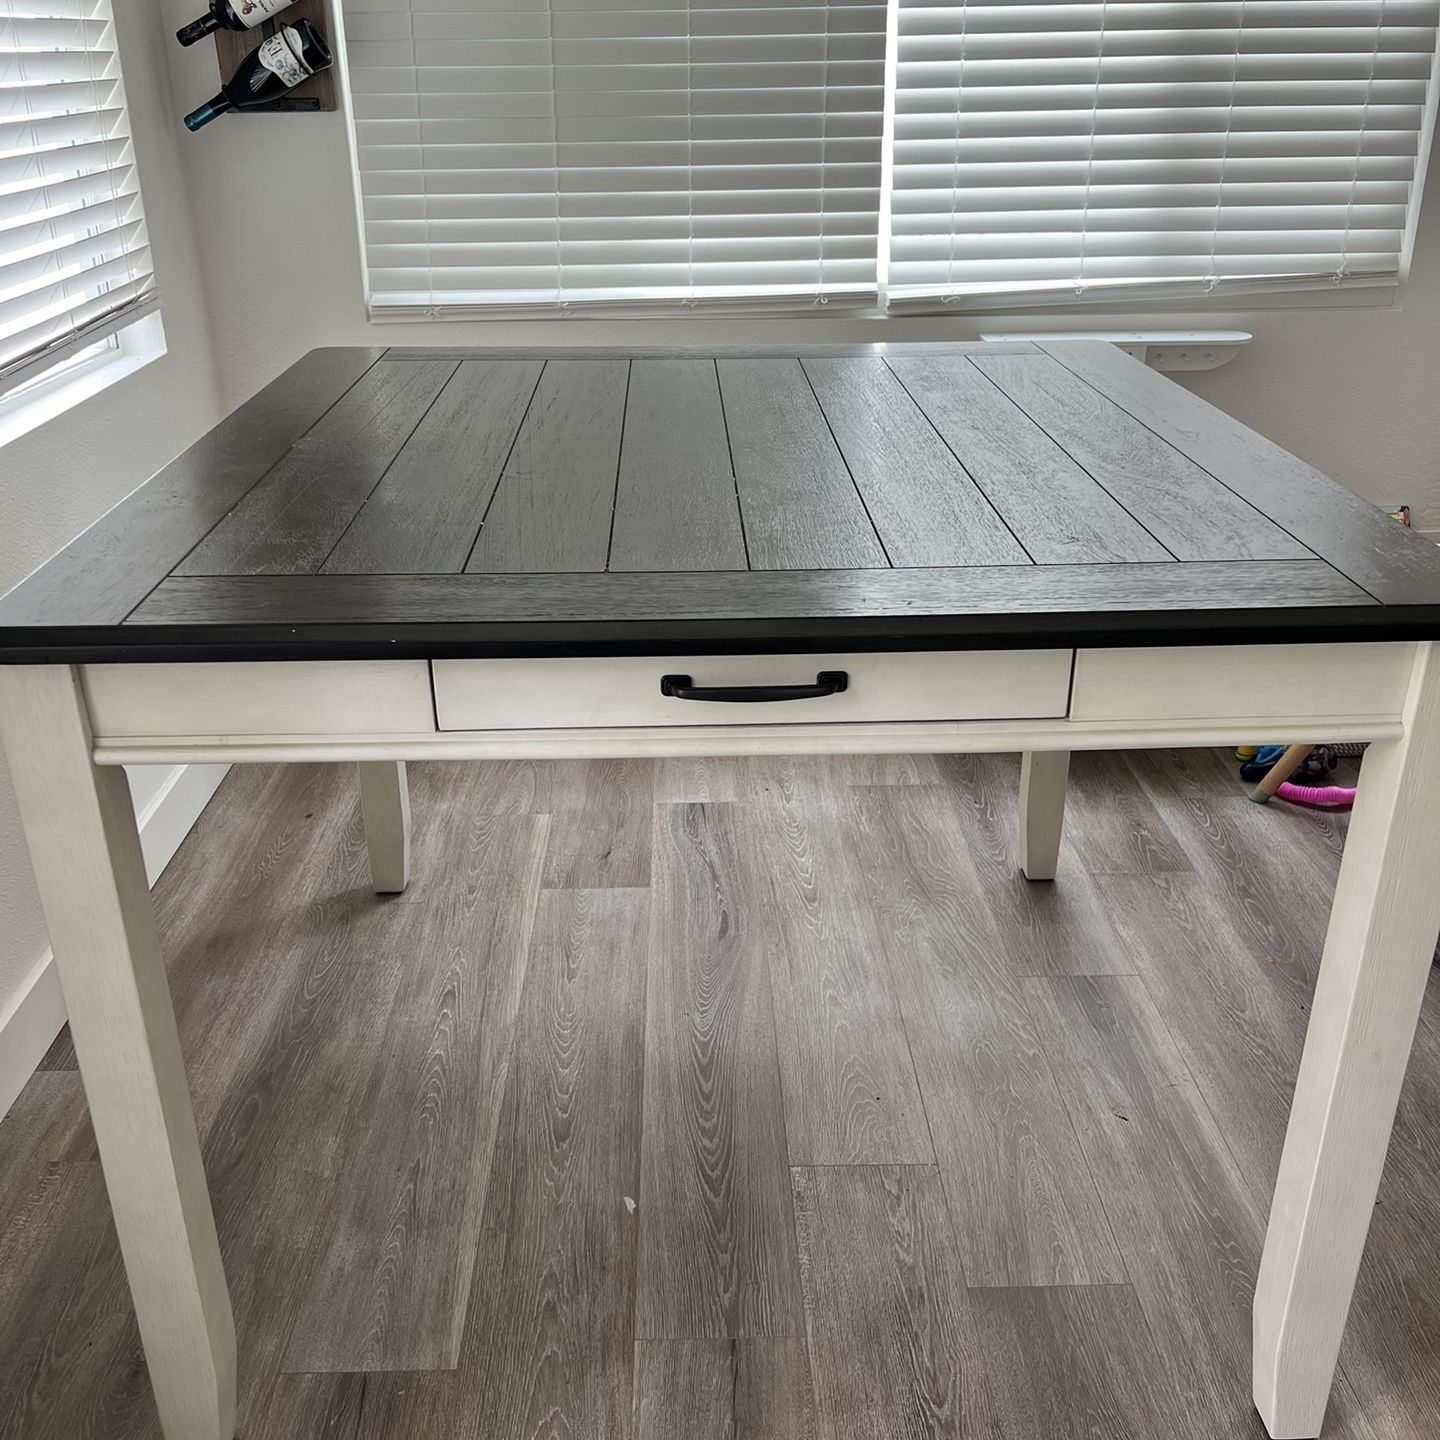 Counter Height Dining Table - Must Go!!! Best Offer 